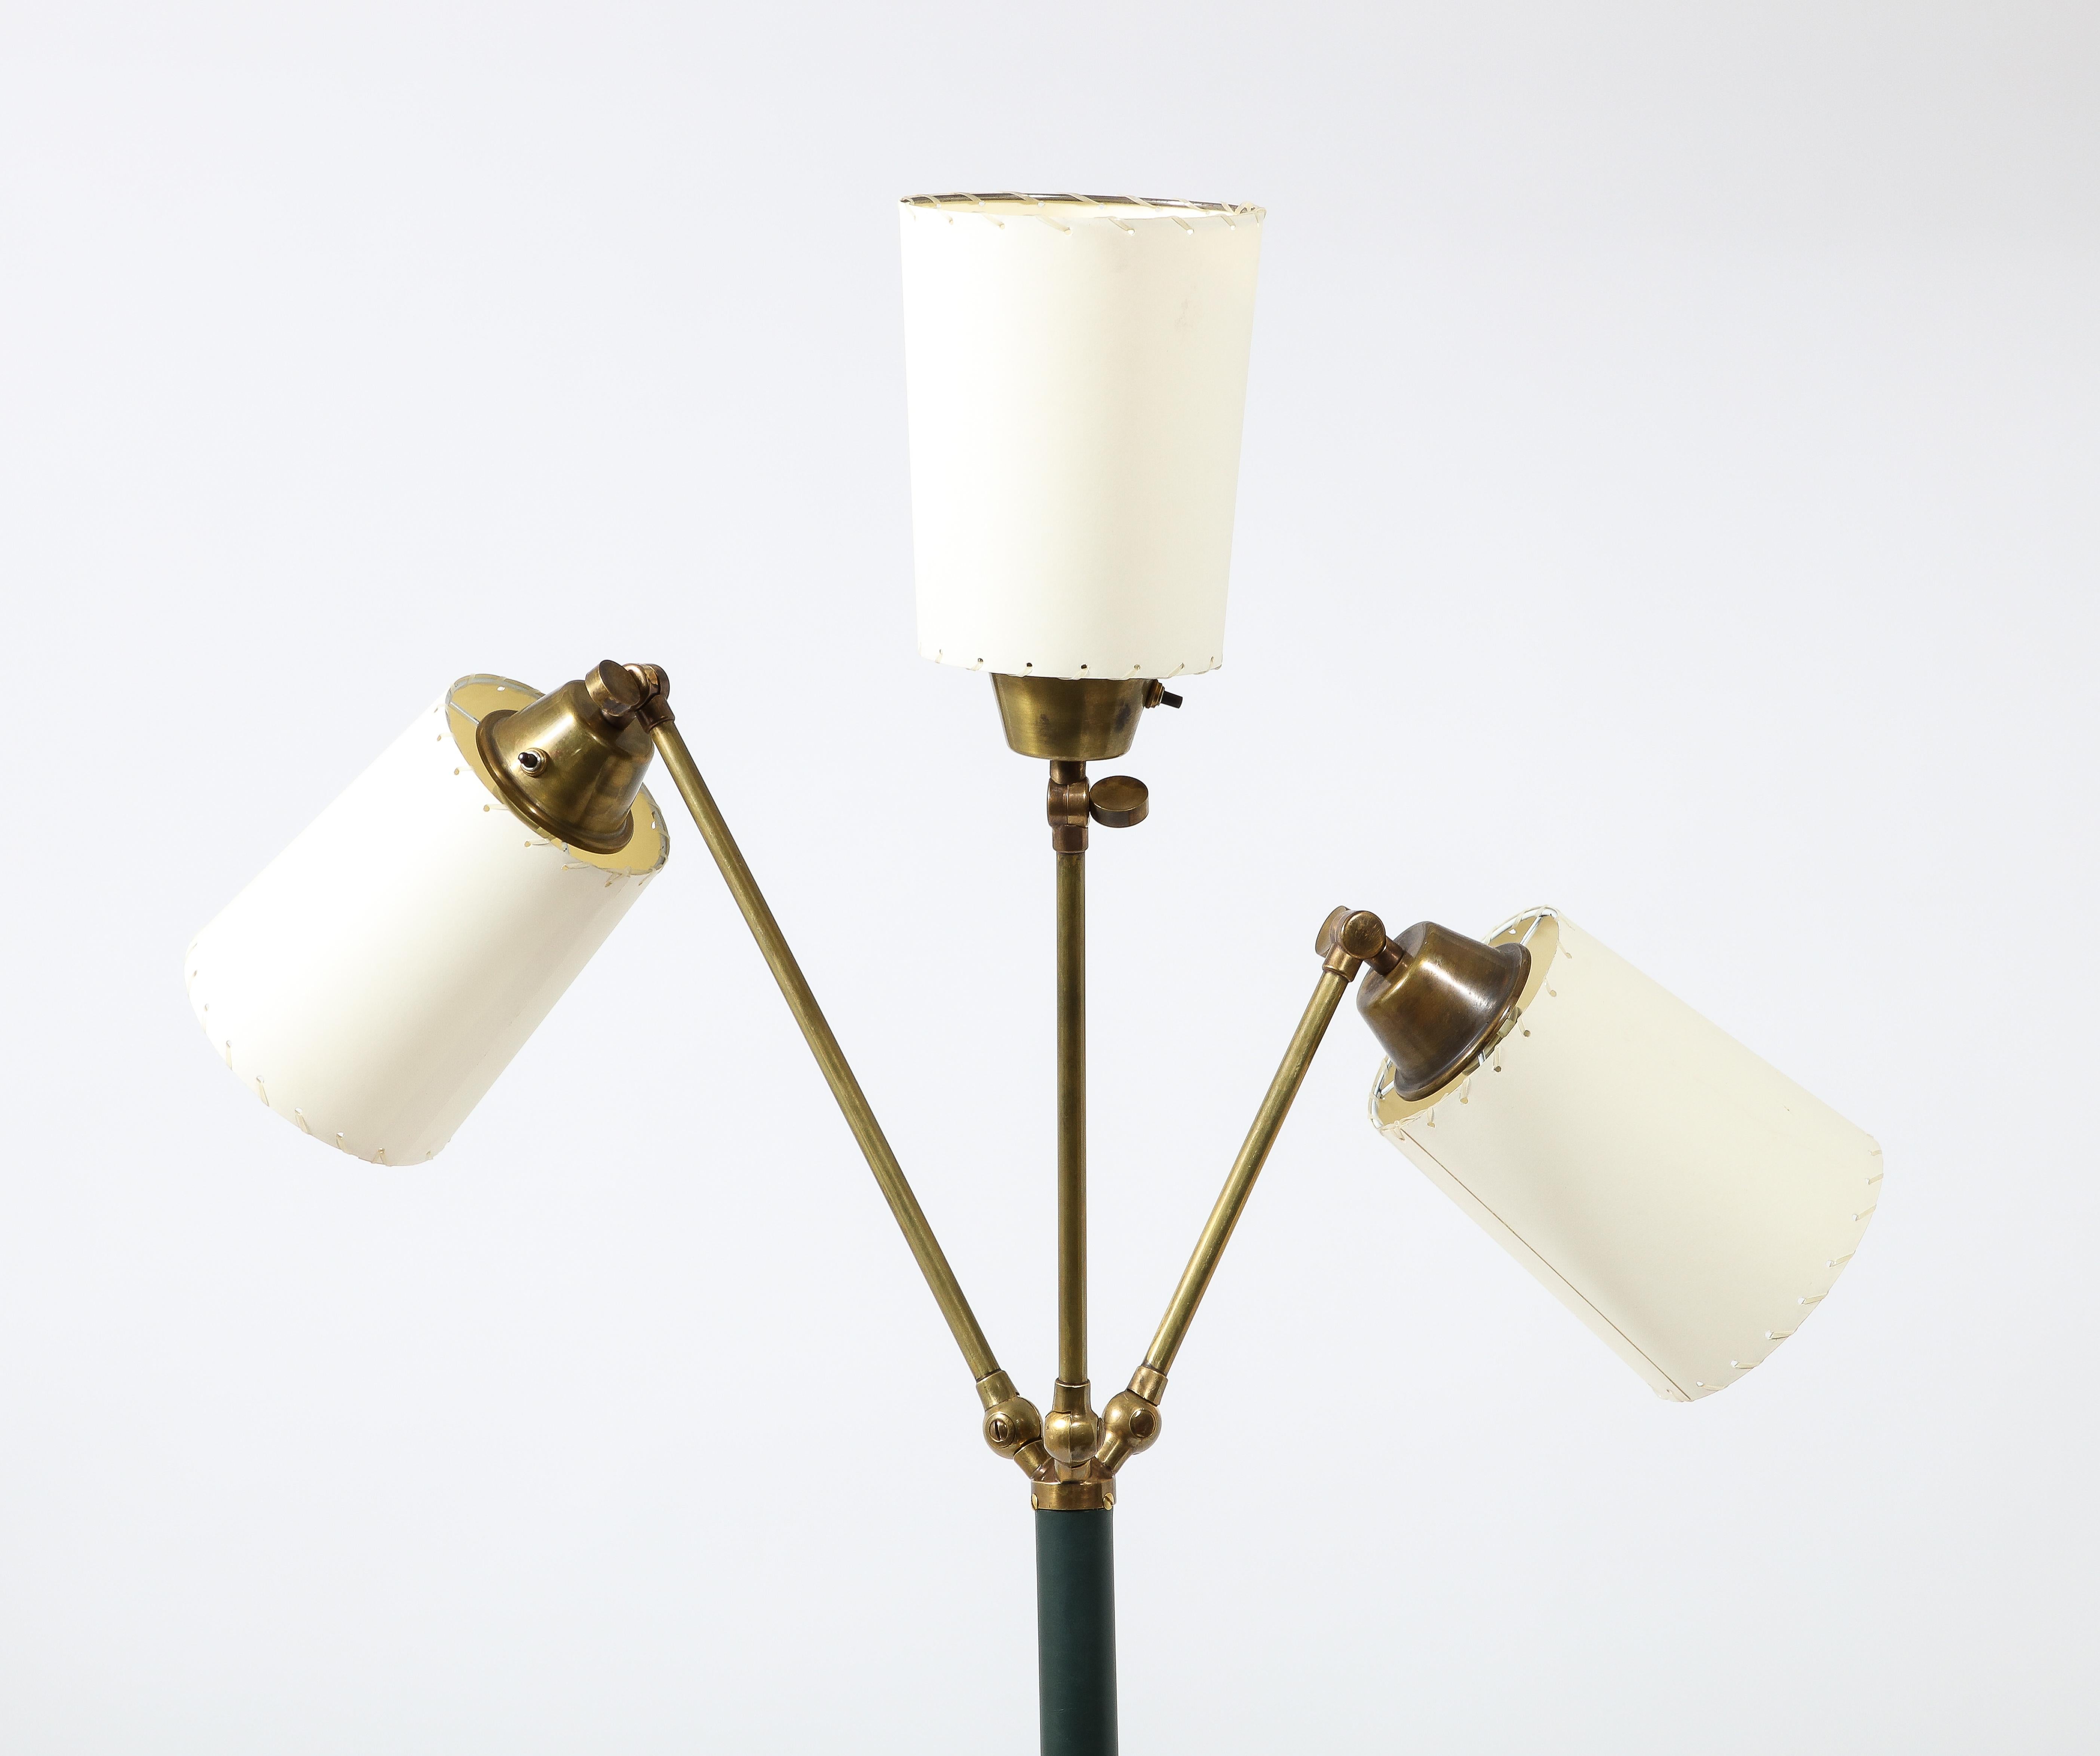 Fully Adjustable floor lamp by J Adnet with three arms, leather stitched stem, and hand-stitched shades. The height and diameter listed vary with arm position.